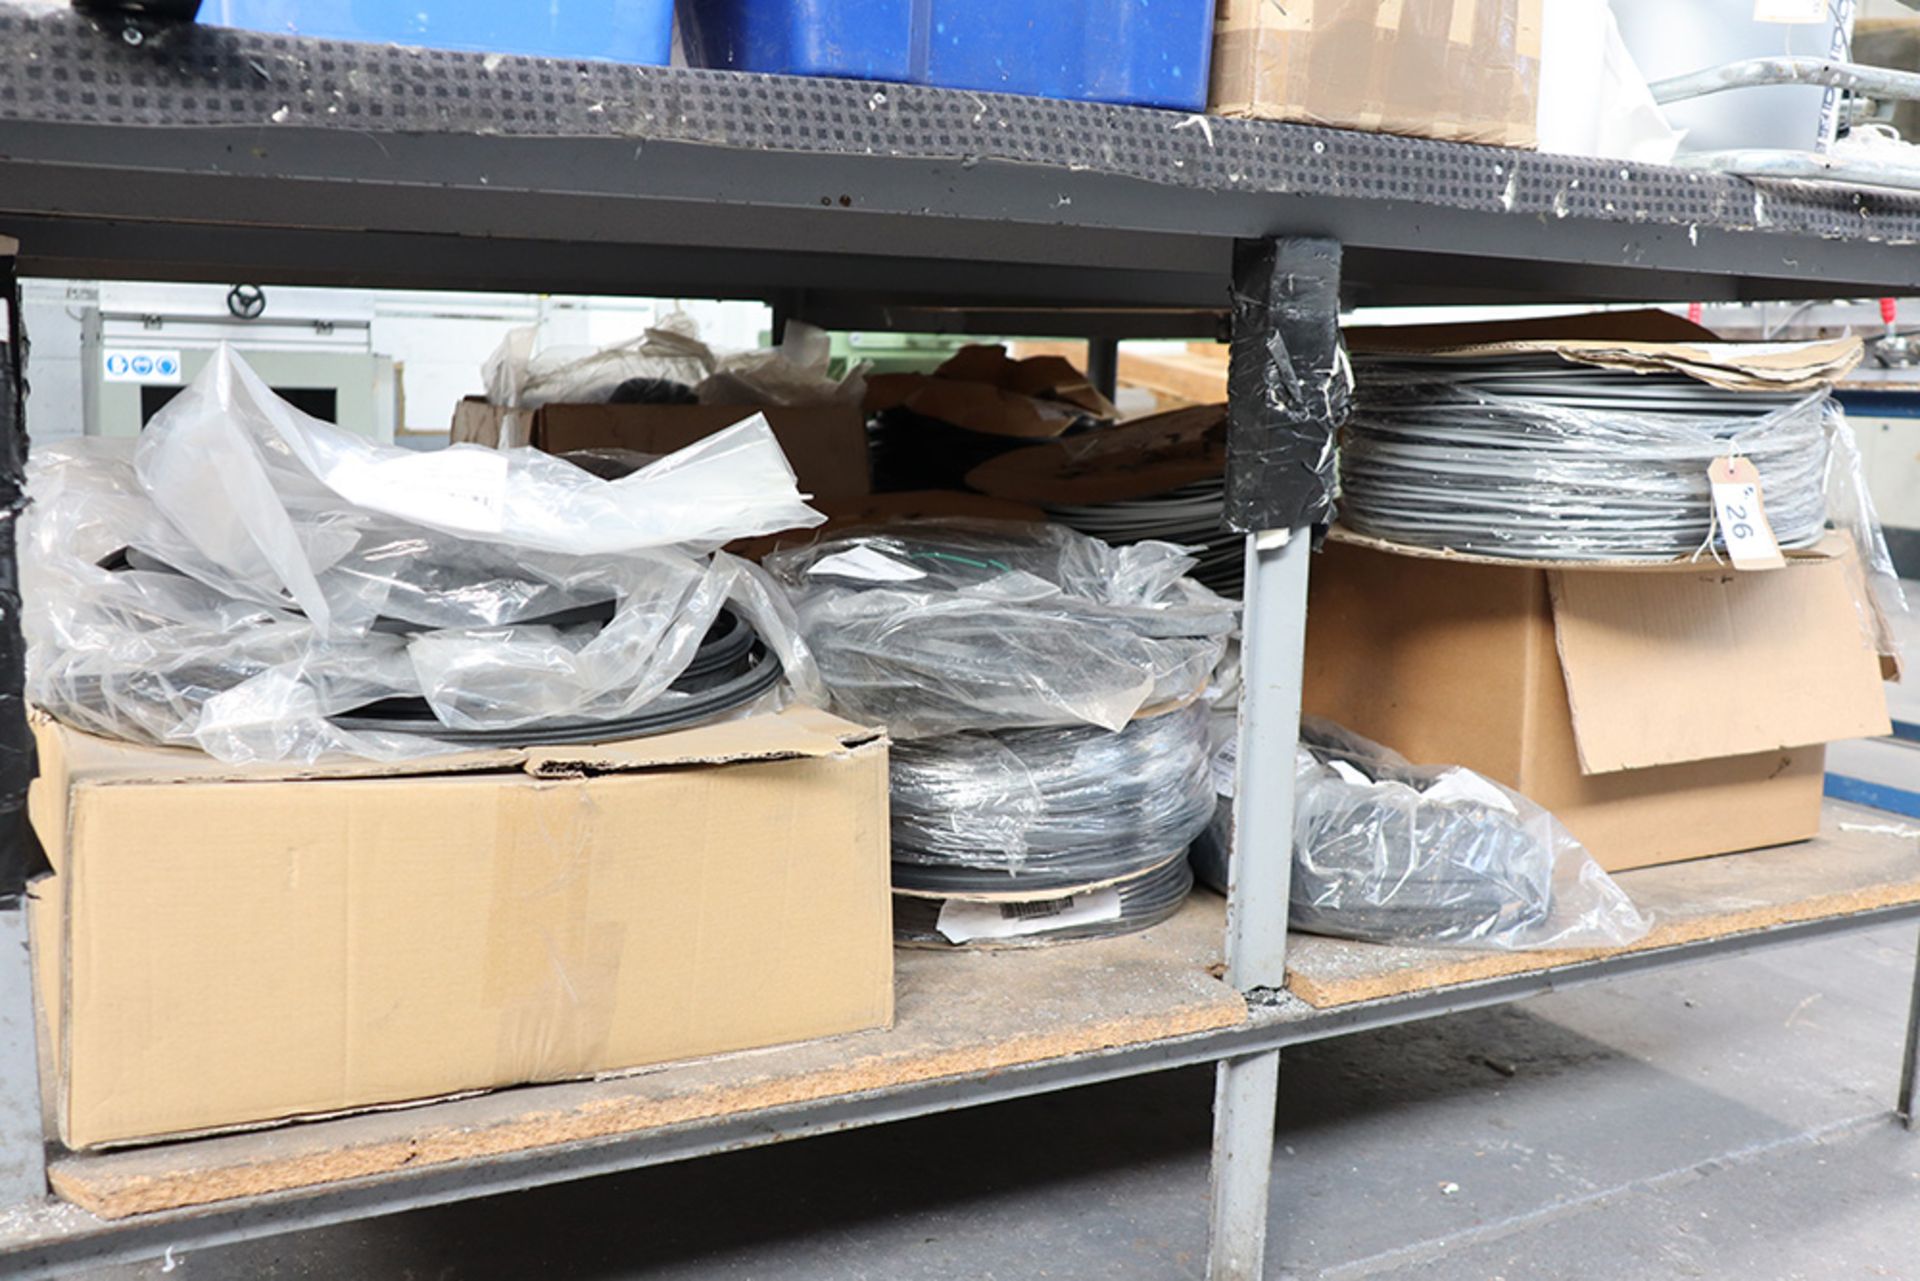 Large quantity of ExtrudaSeal and other door and window seal (under the bench)